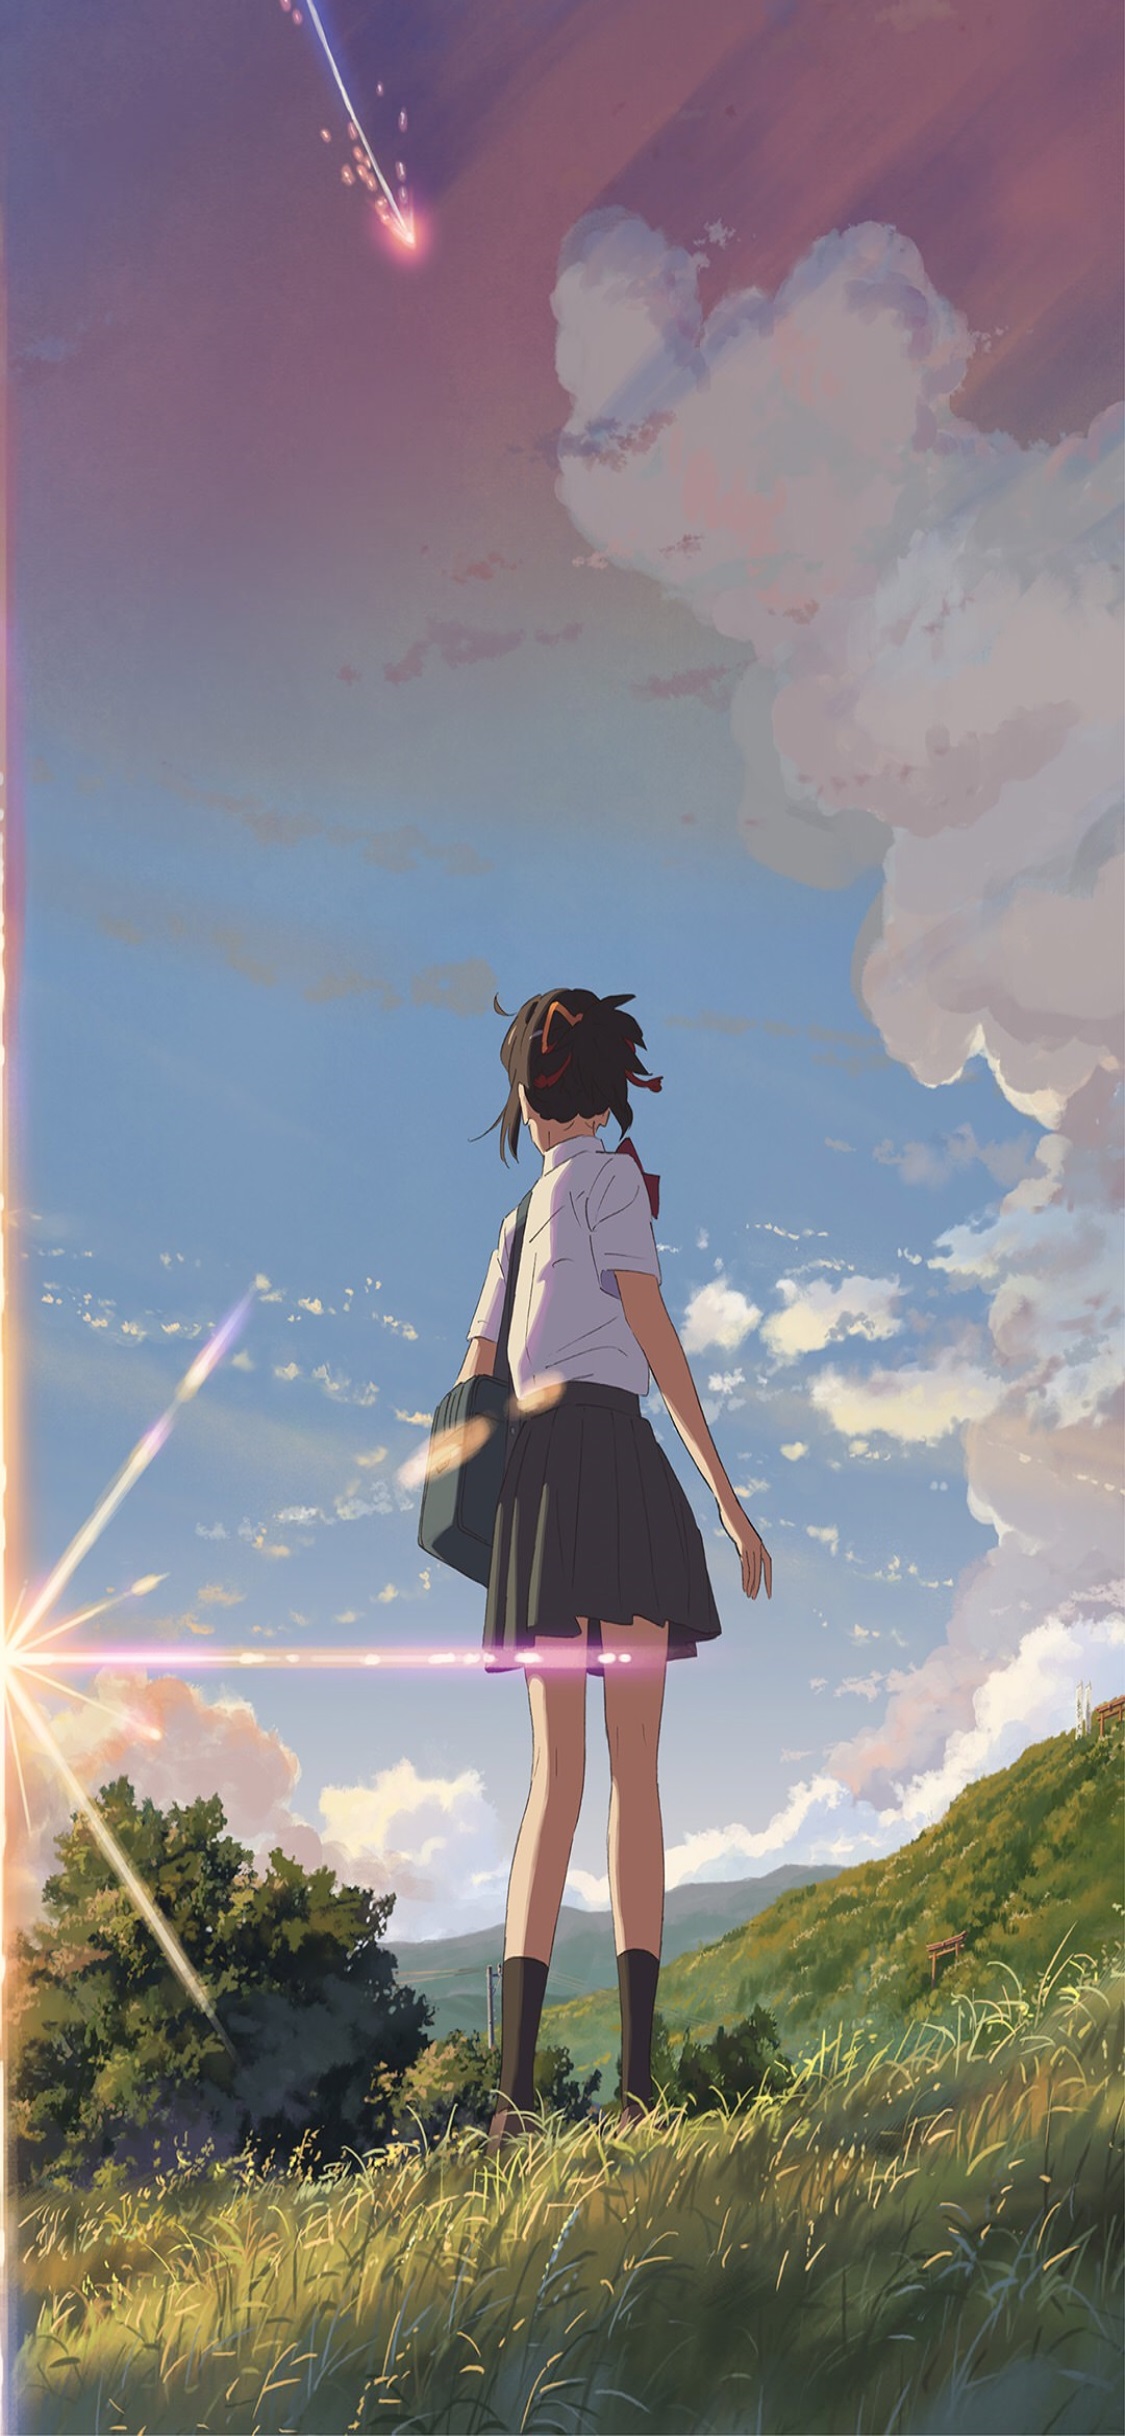 Your Name Wallpaper For Iphone - Your Name Wallpaper Iphone X ...